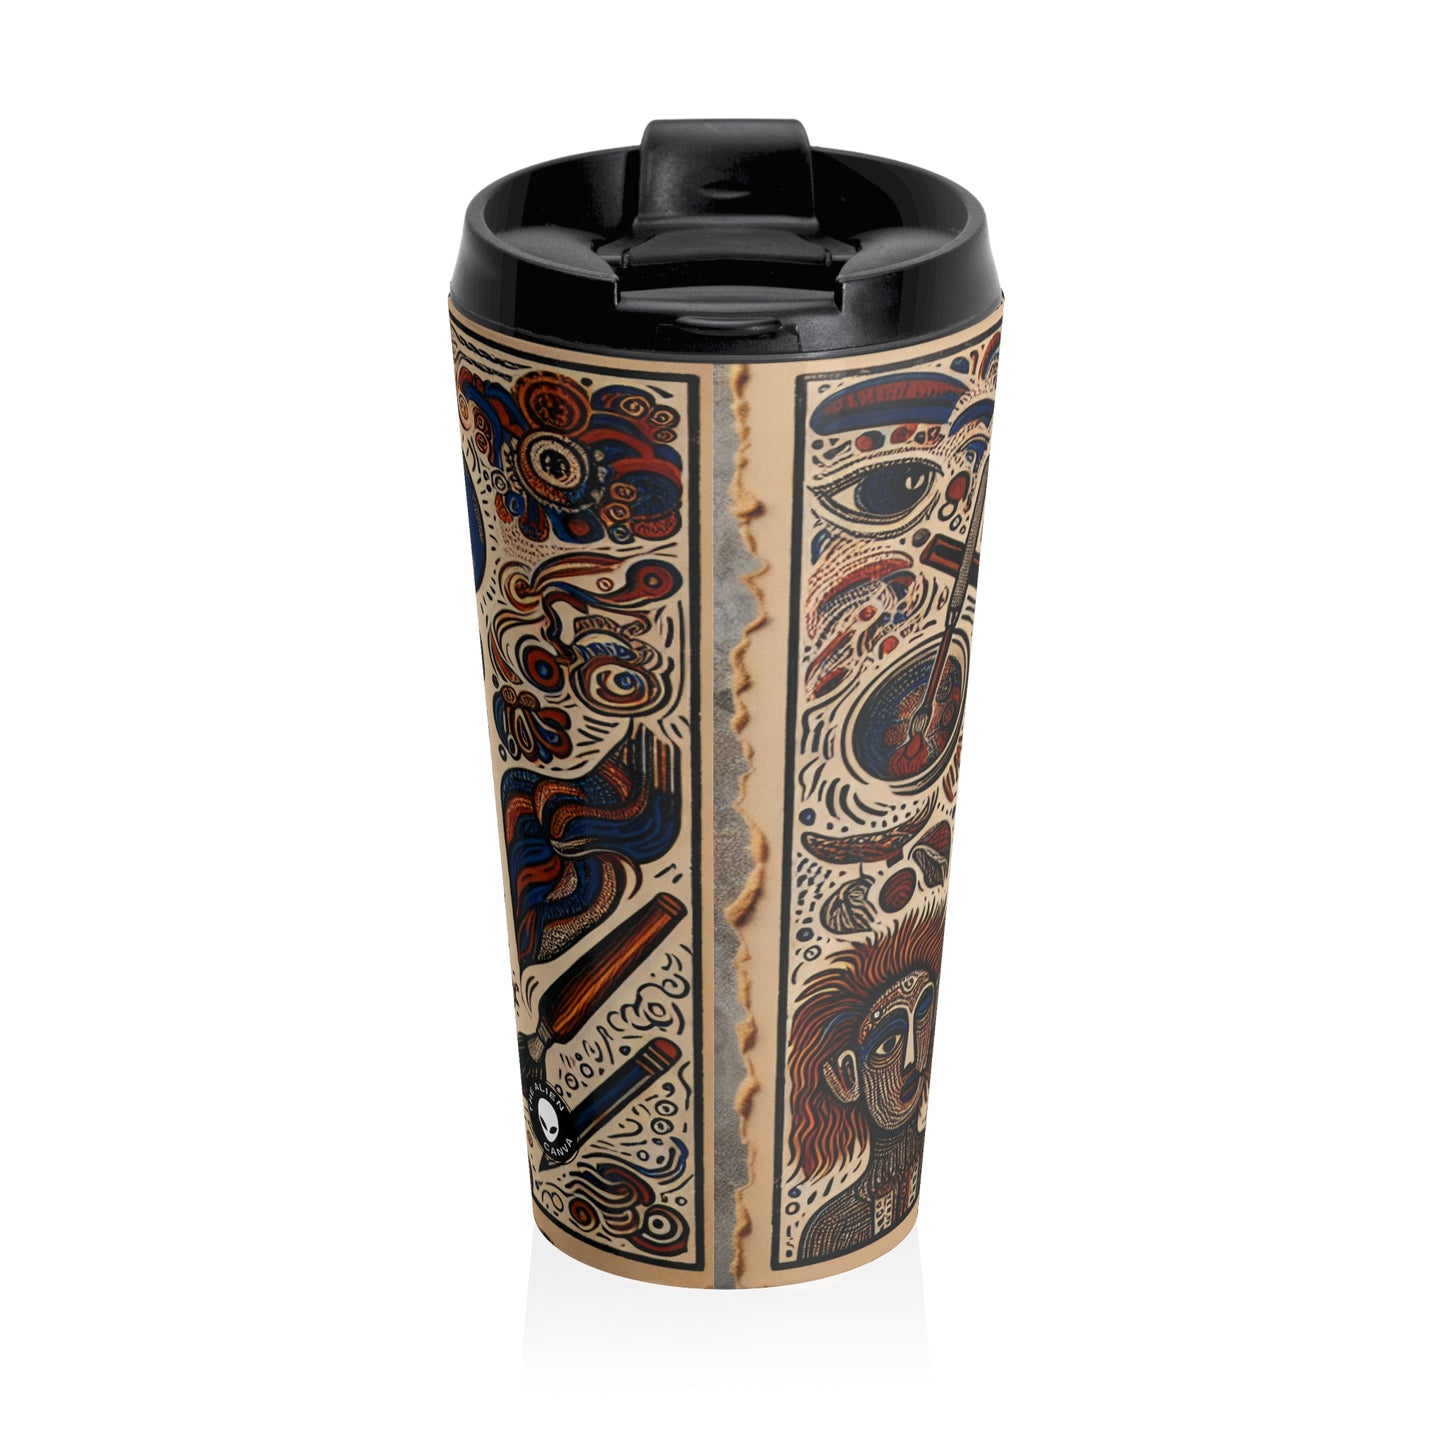 "Visions of the Beyond: A Surreal Dreamscape" - The Alien Stainless Steel Travel Mug Outsider Art